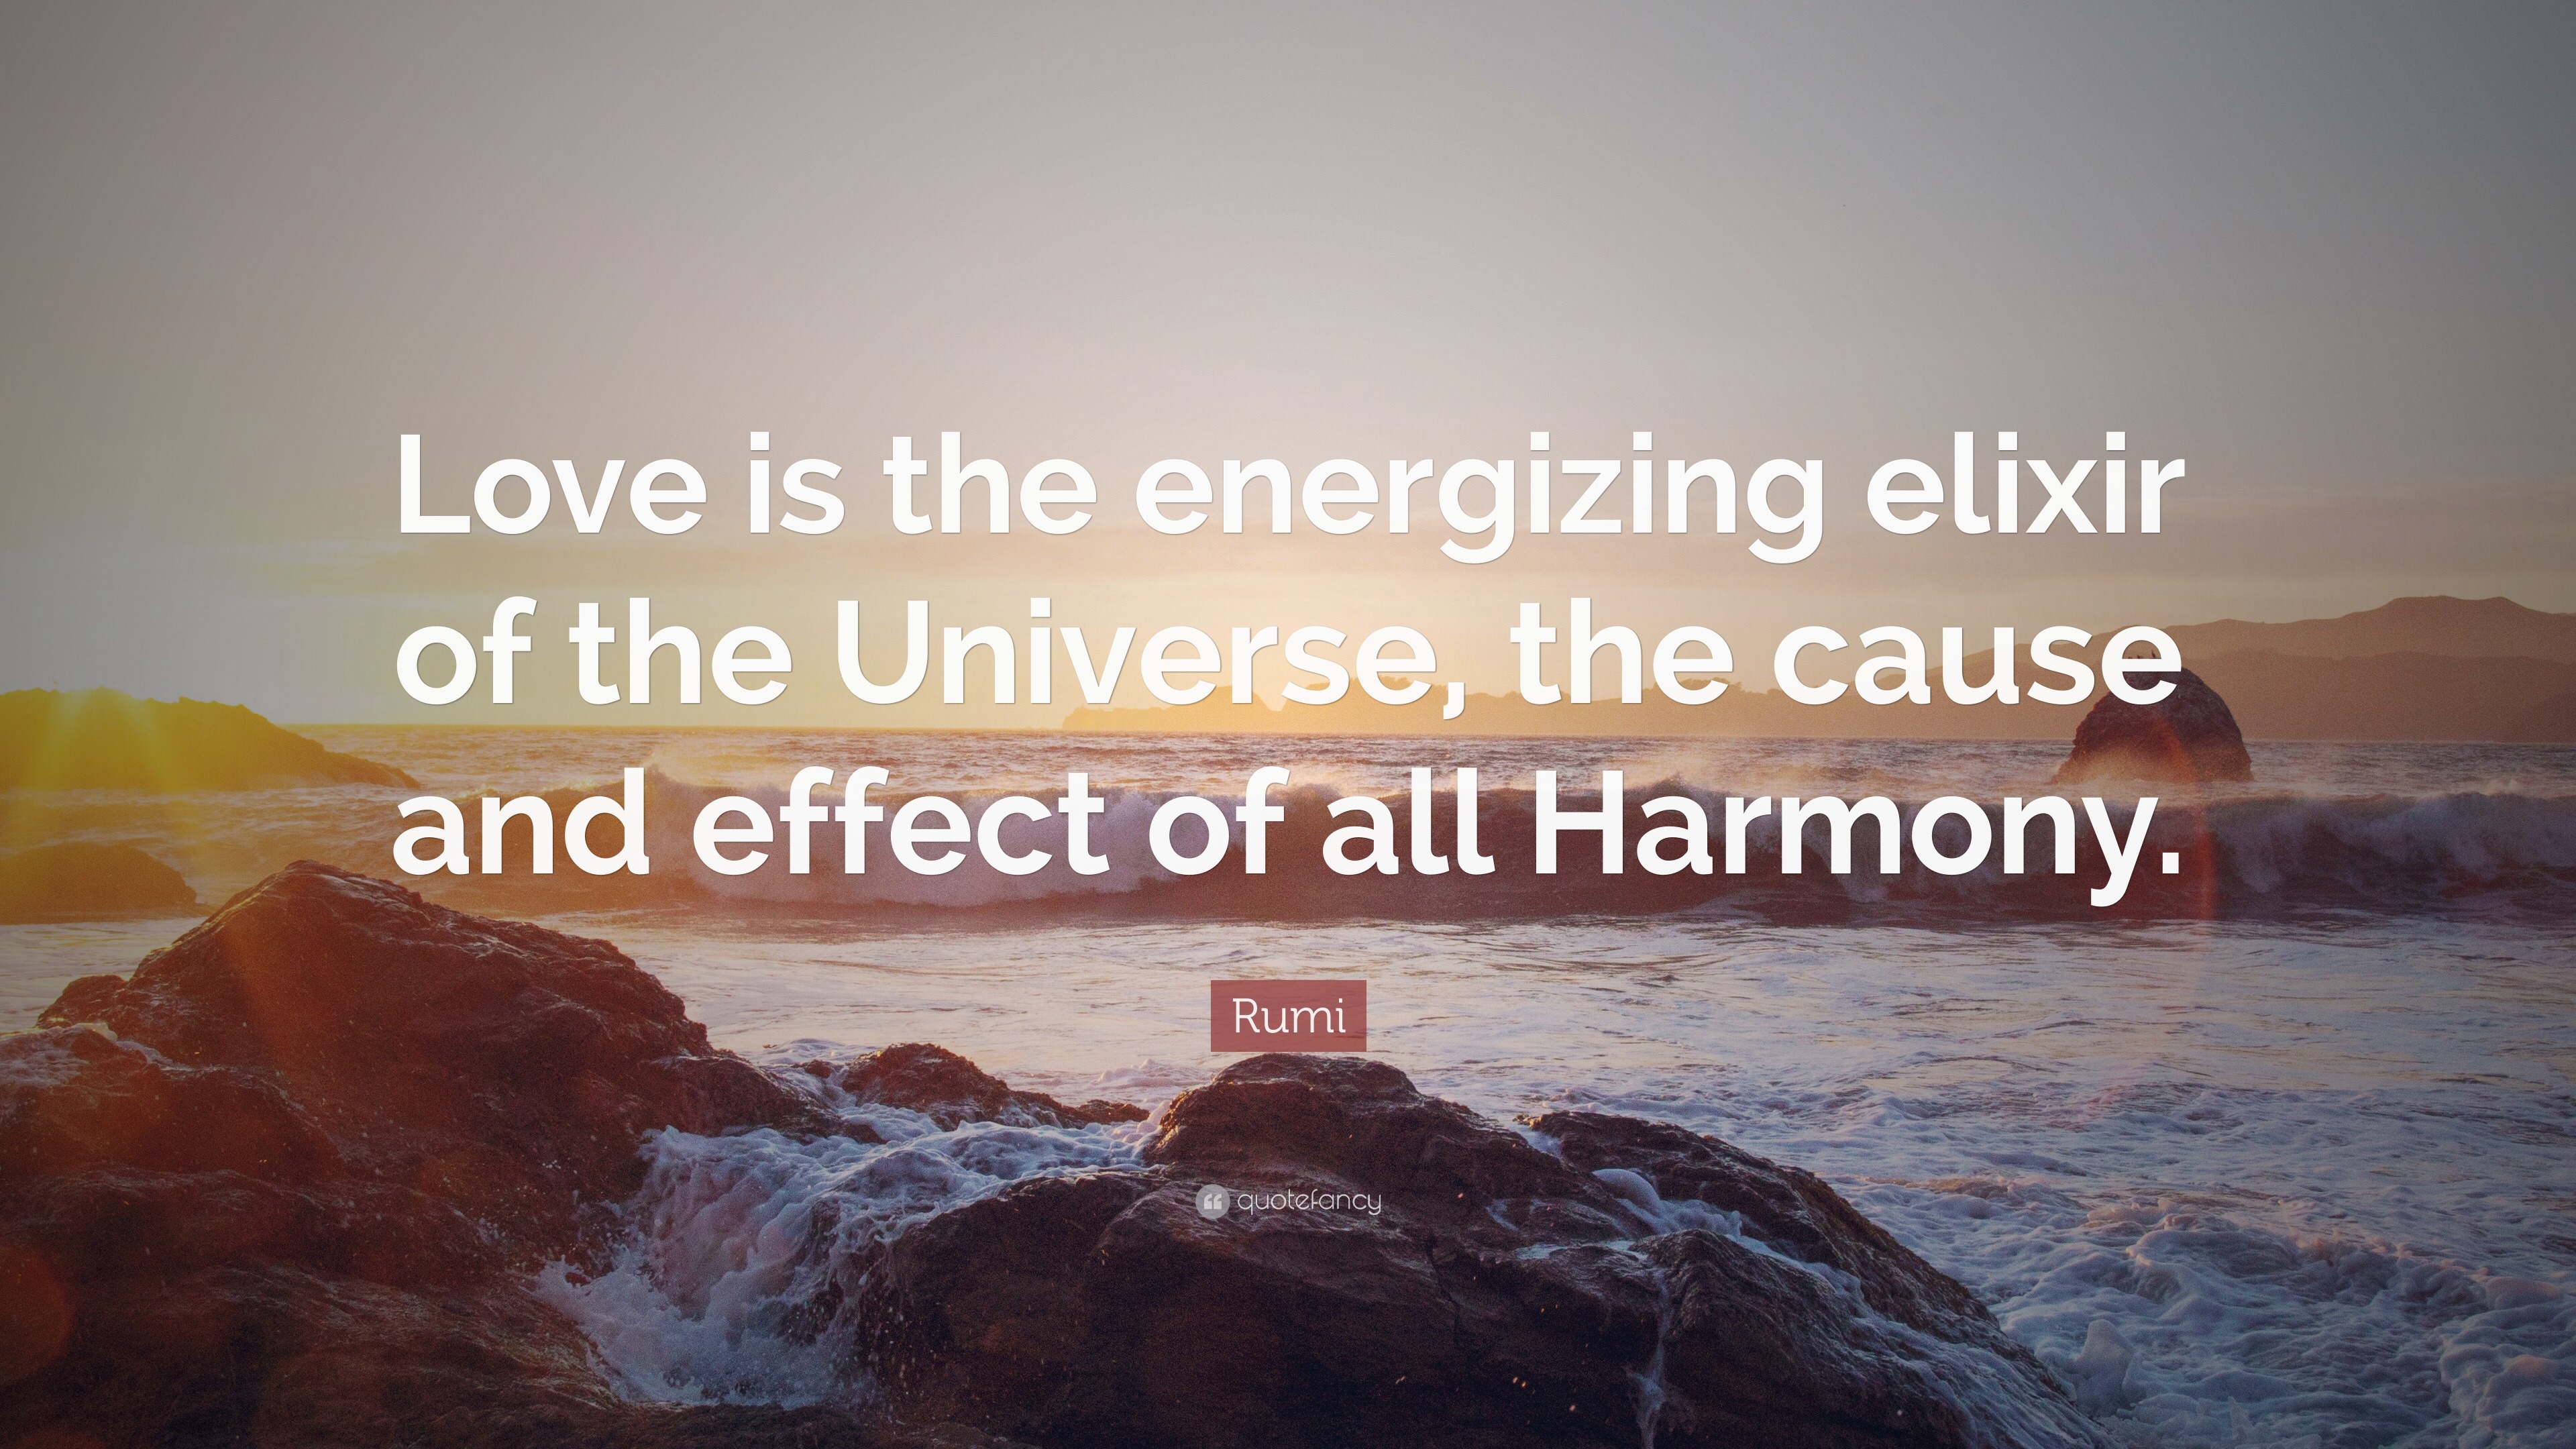 Rumi Quote “Love is the energizing elixir of the Universe